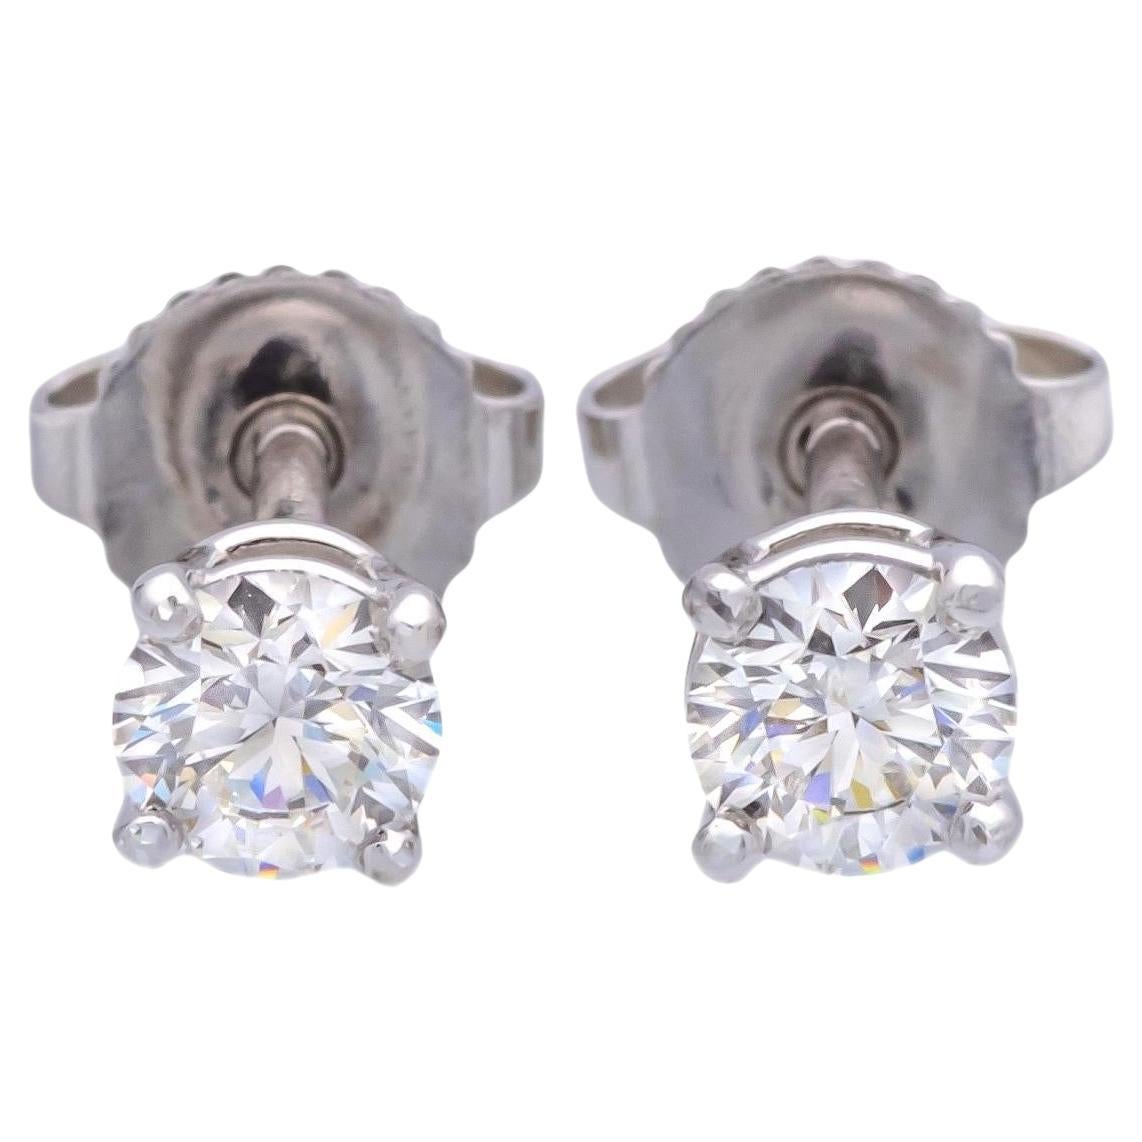 Tiffany & Co. Platinum Round .62 Cts. TW Diamond FVS1 Solitaire Stud Earrings